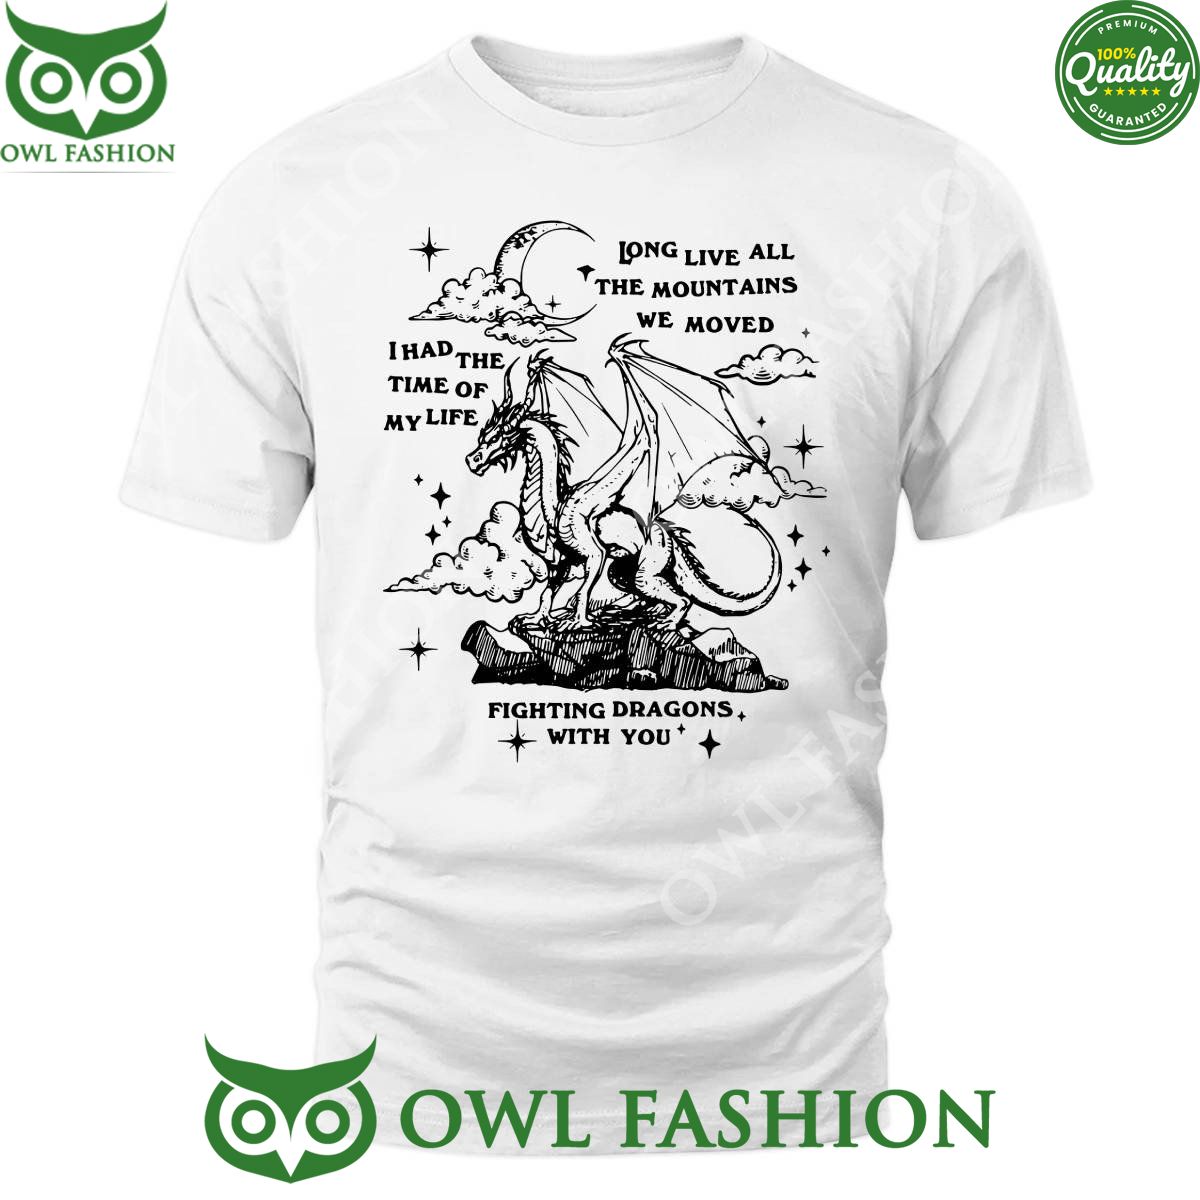 taylor swift fighting dragons with you i had the time long live all the mountains we moved t shirt 1 L9qF7.jpg